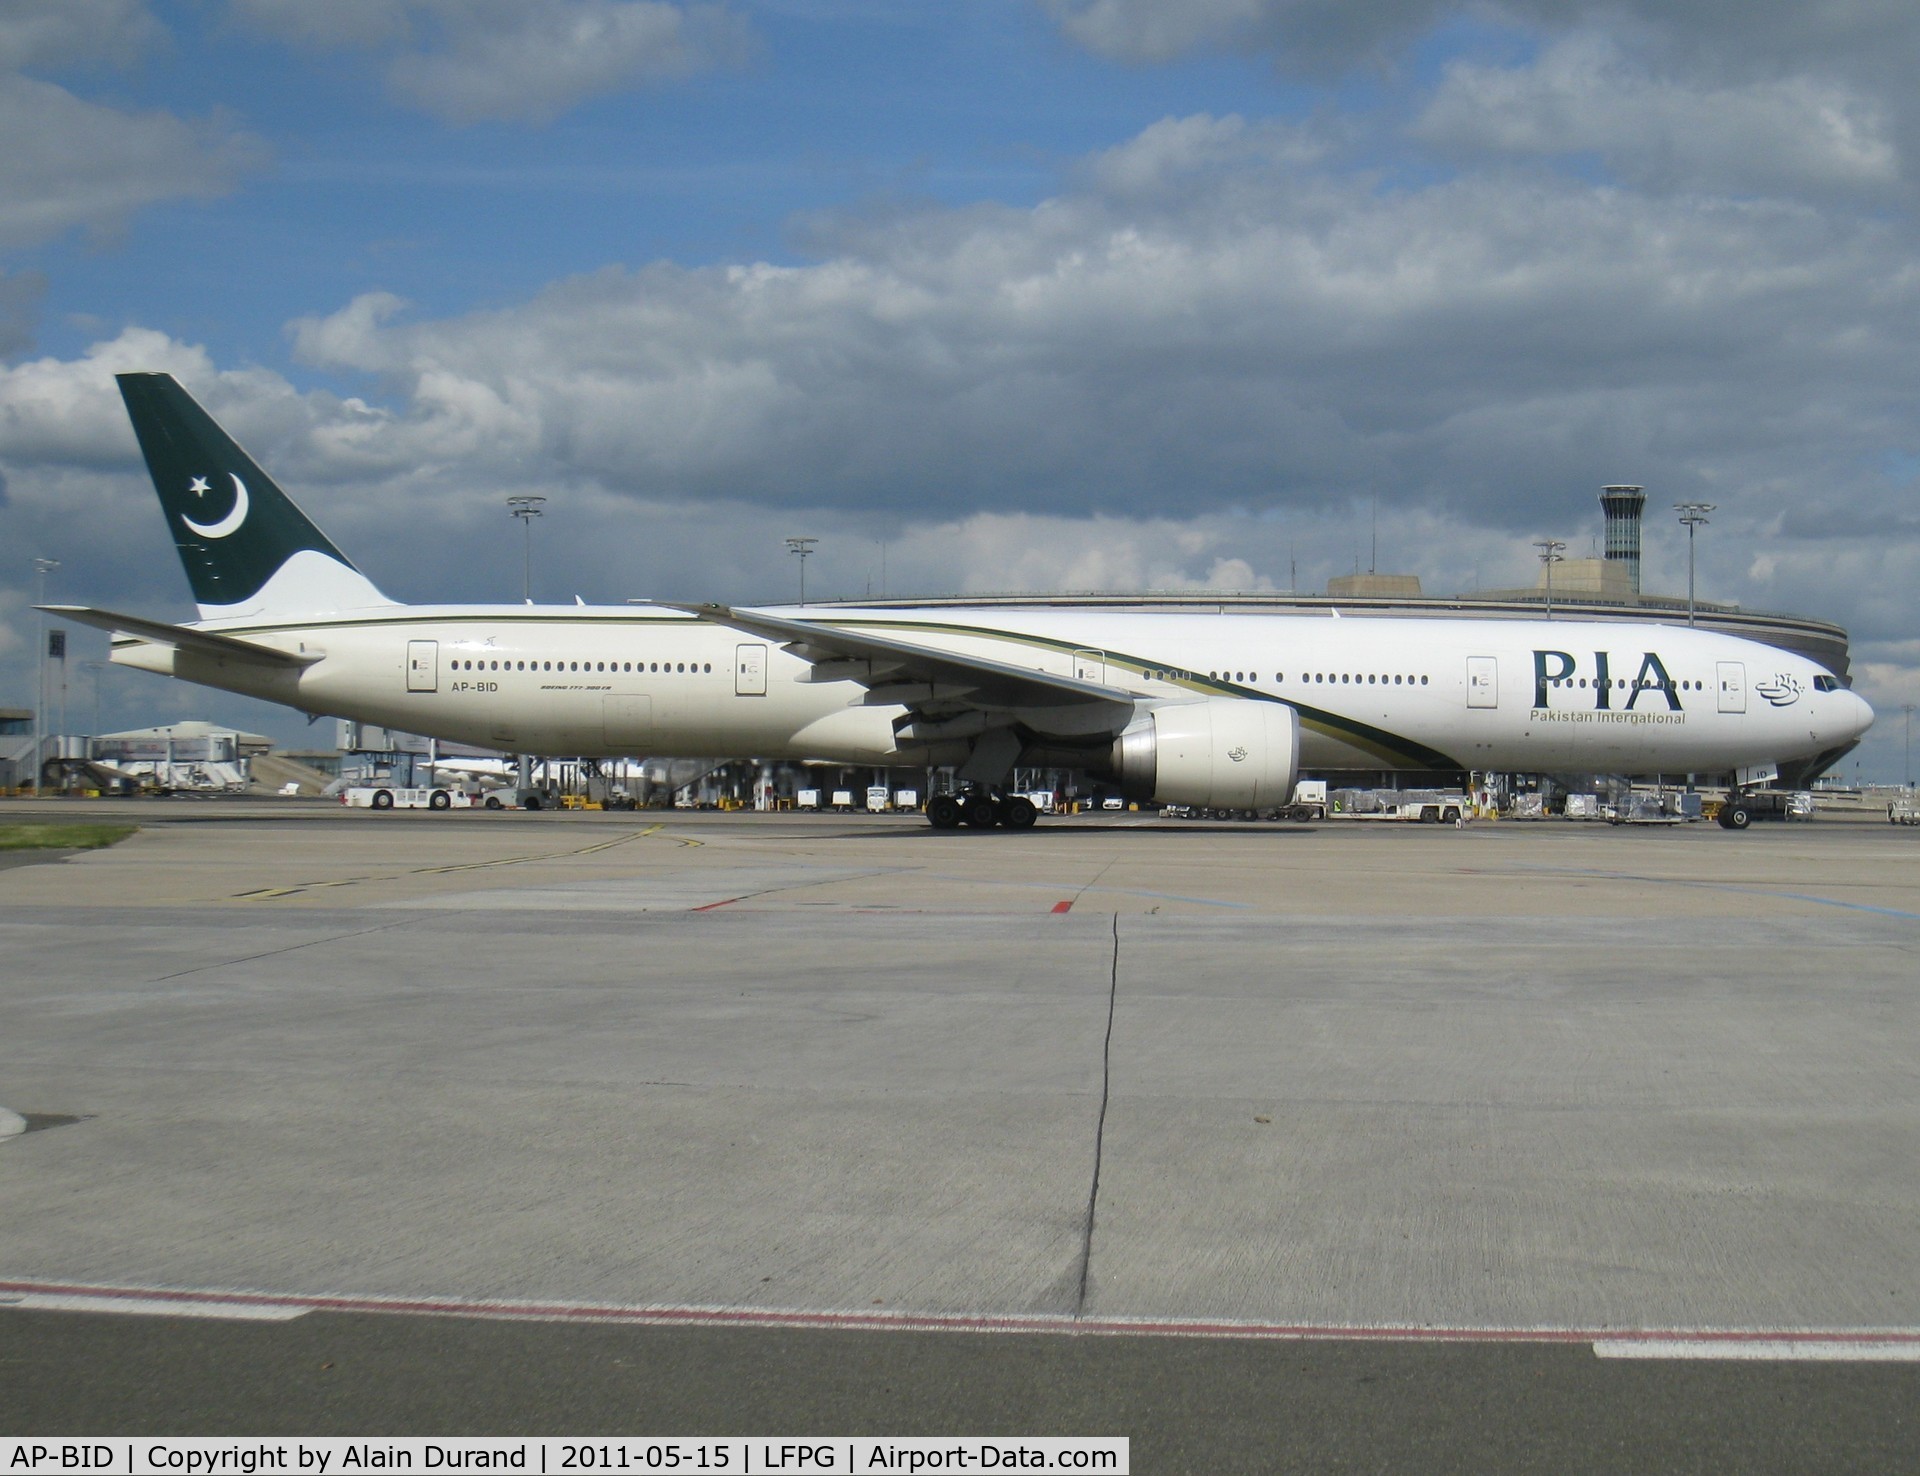 AP-BID, 2008 Boeing 777-340/ER C/N 33780, PIA is another airline serving Paris which also came to the point of surrendering to the mighty 777